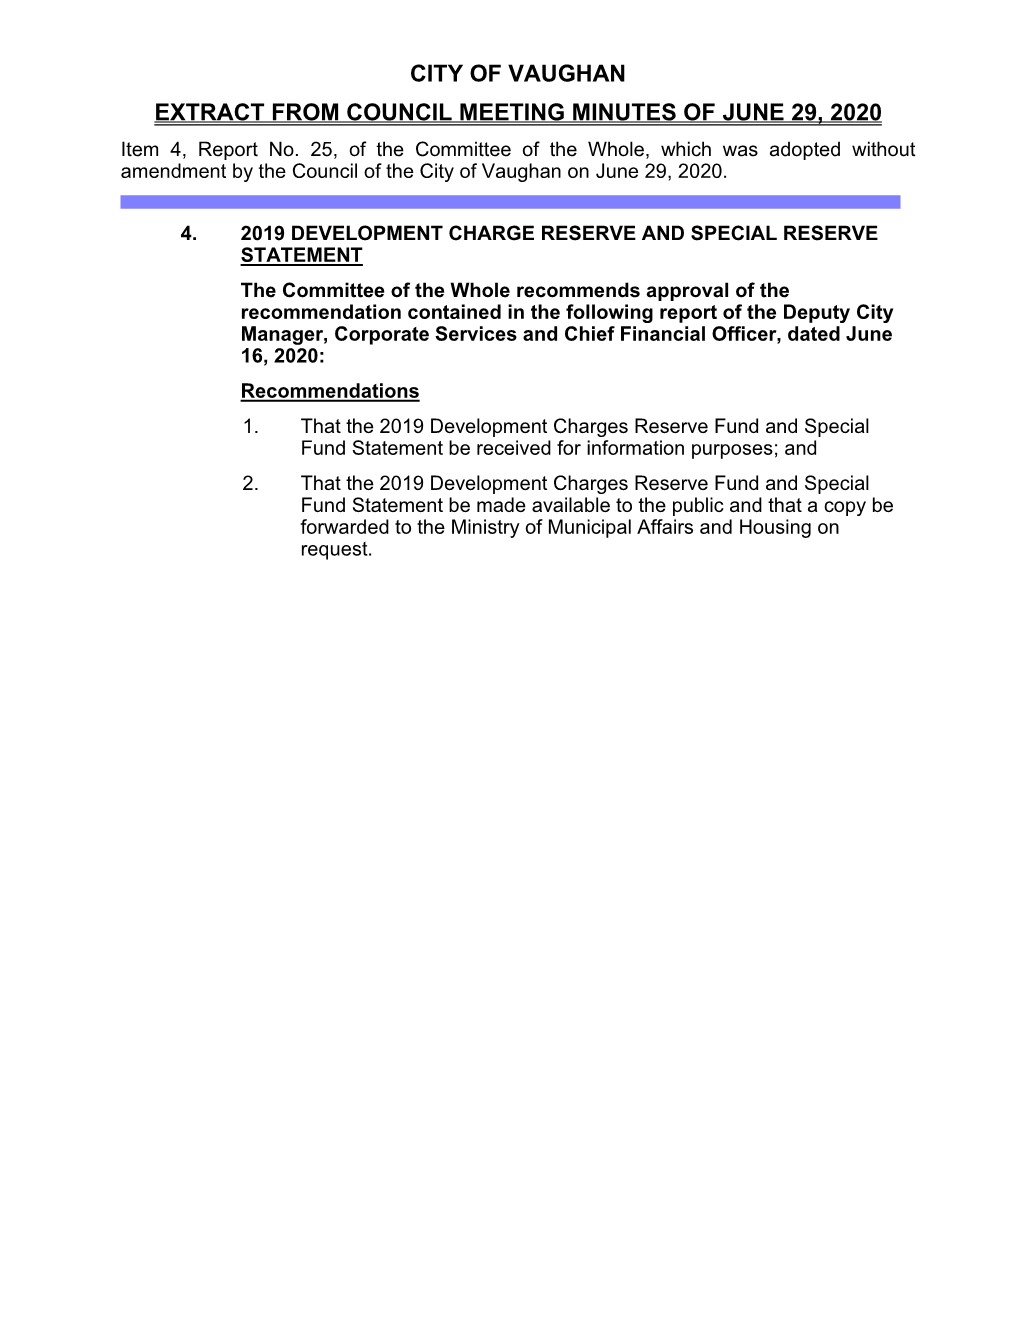 CITY of VAUGHAN EXTRACT from COUNCIL MEETING MINUTES of JUNE 29, 2020 Item 4, Report No